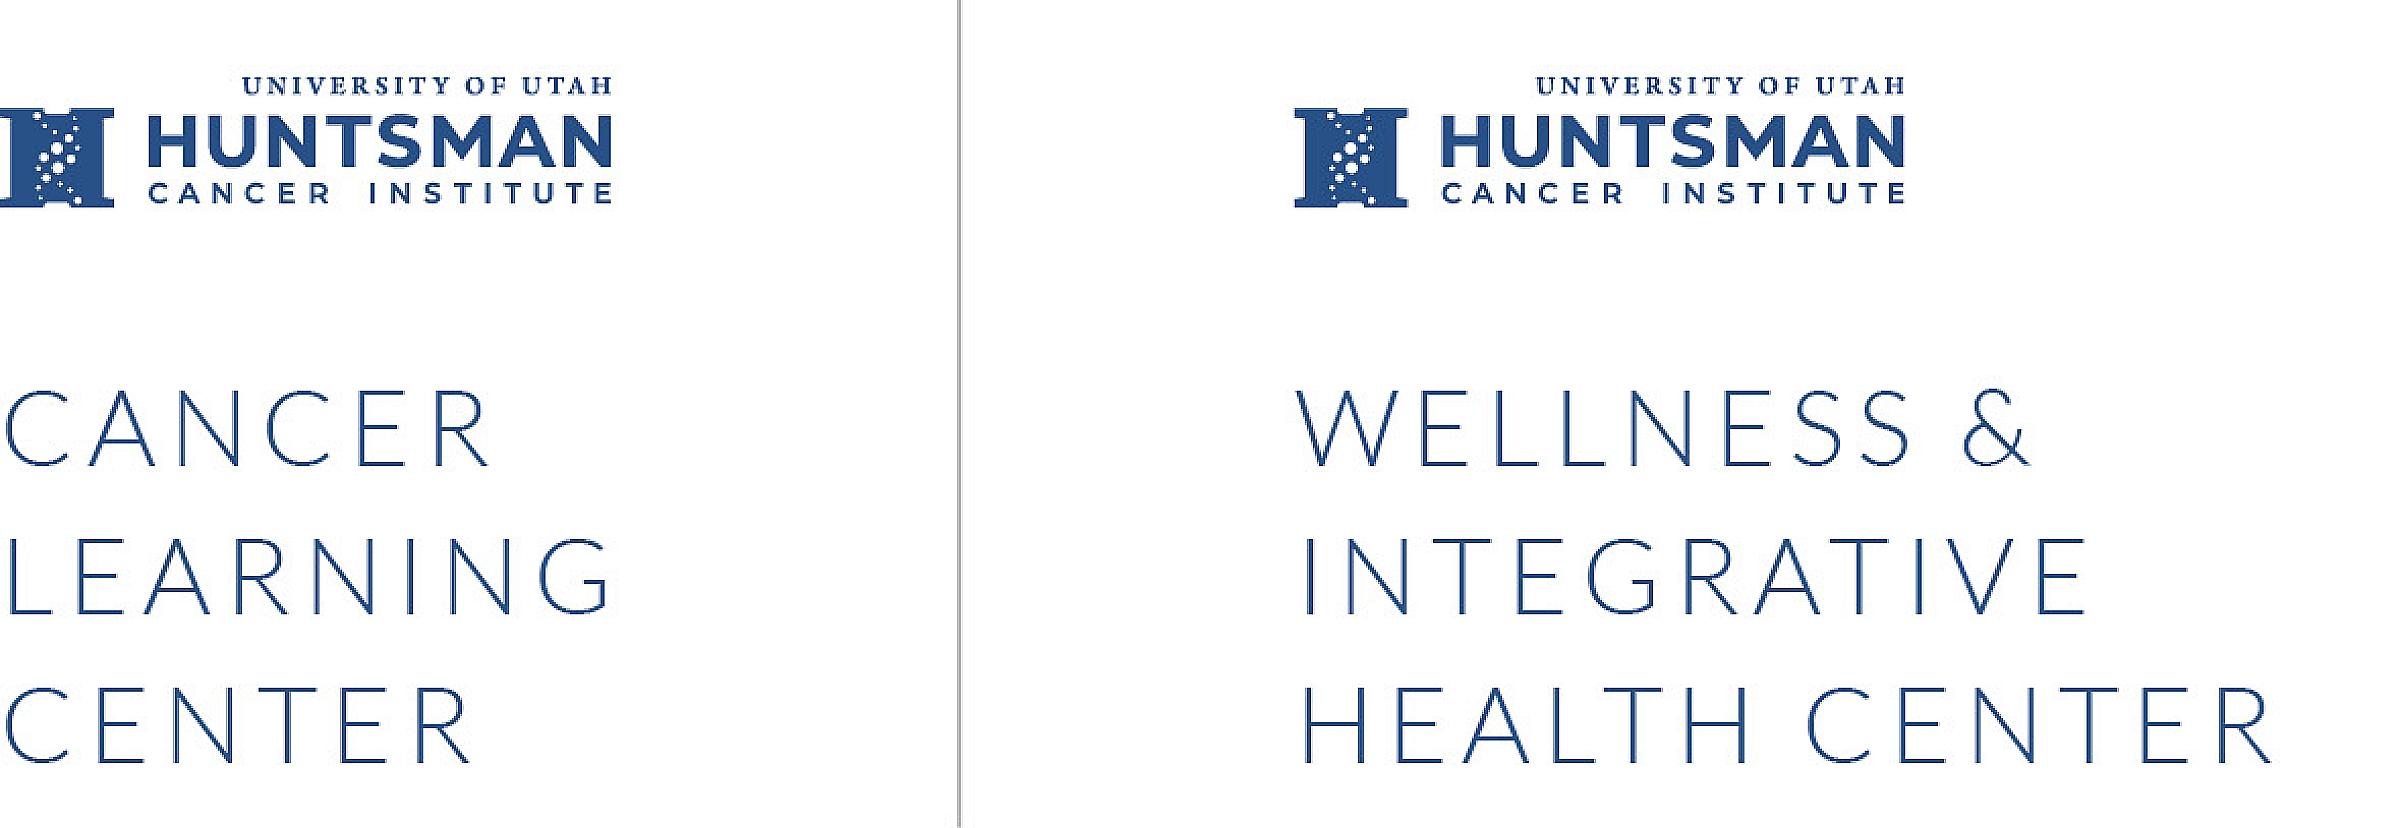 Examples of service names near the Huntsman Cancer Institute logo